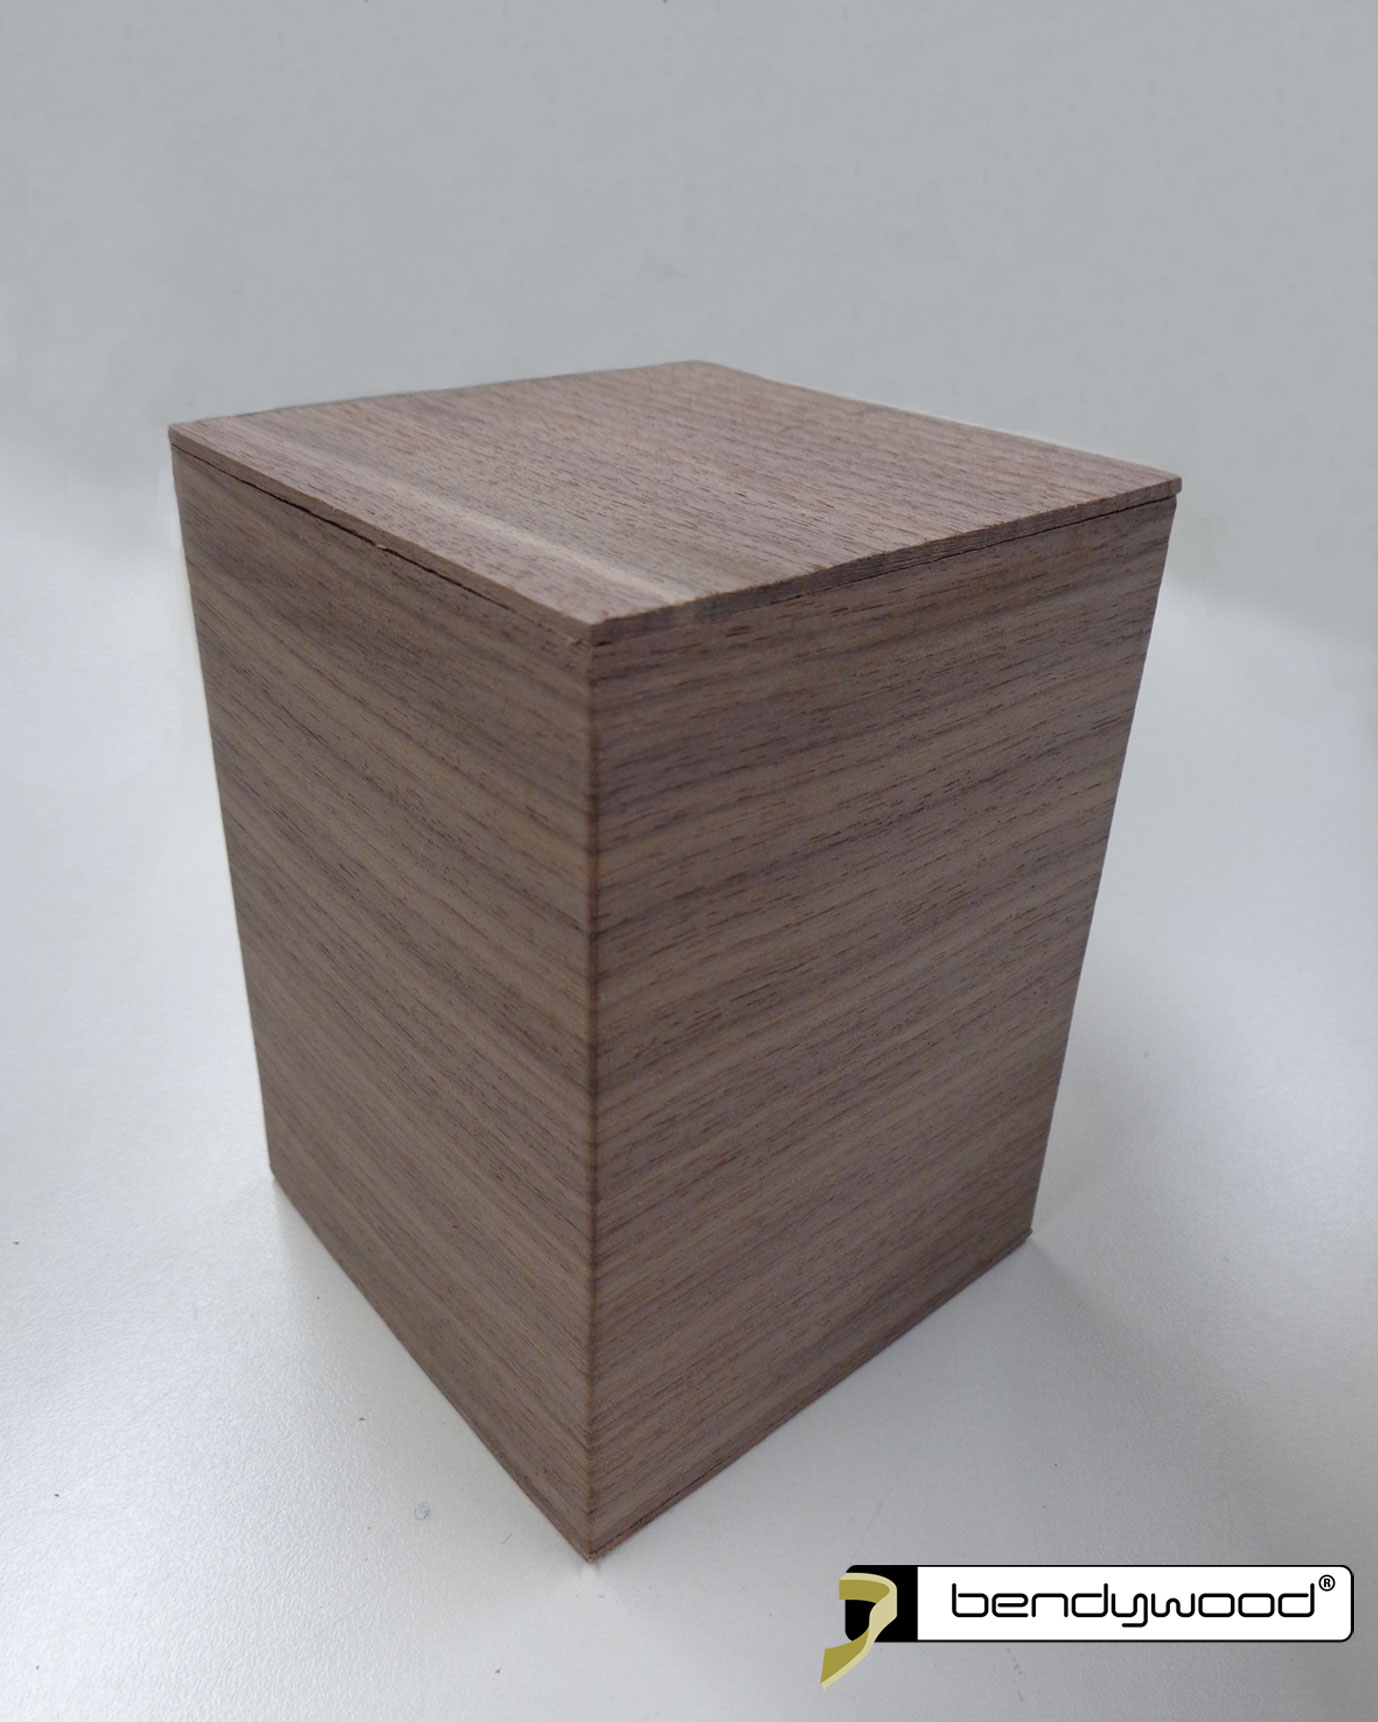 Box produced using just 1 piece of Bendywood®-walnut, without interruptions at the corners.